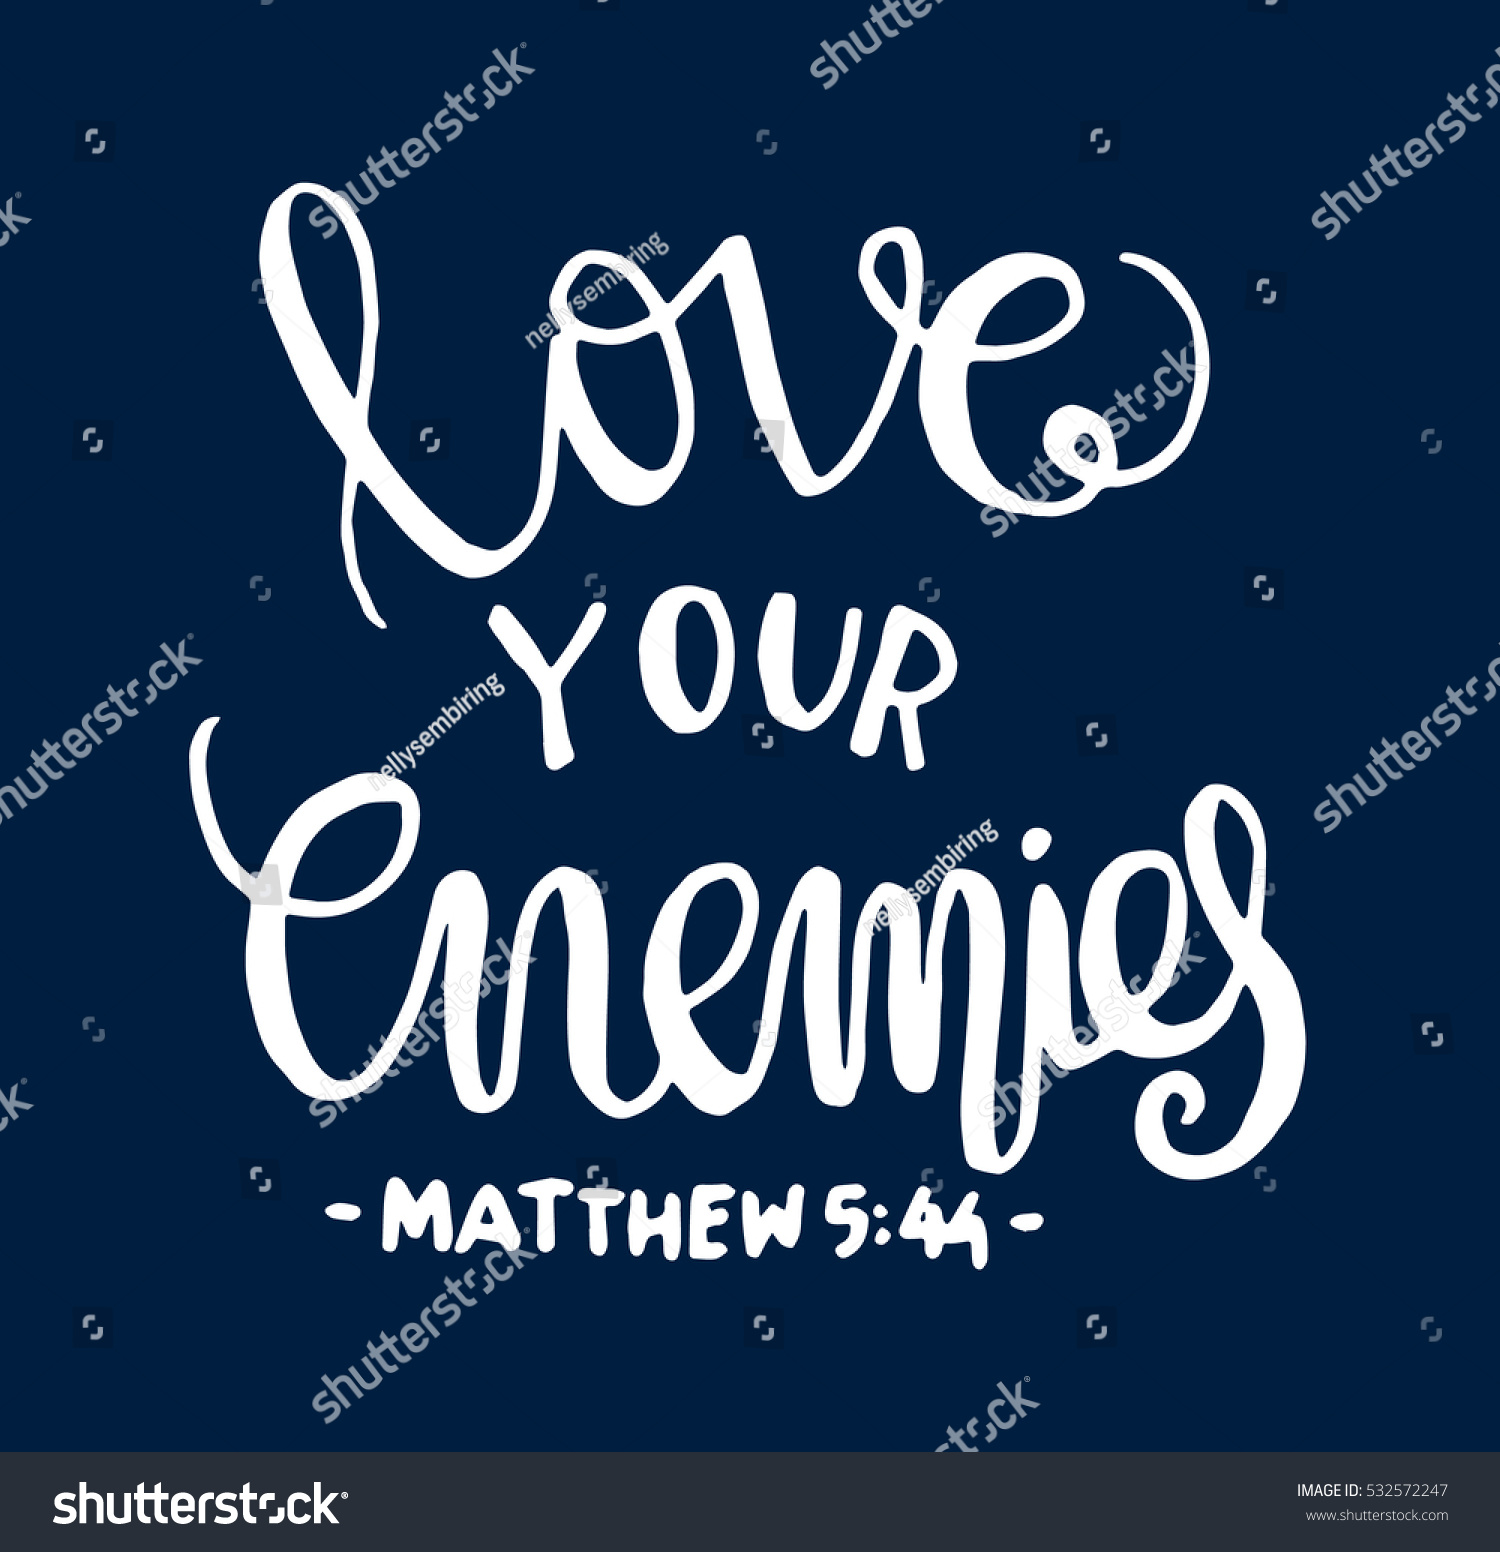 love your enemies Bible Verse Hand Lettered Quote Modern Calligraphy Christian Poster